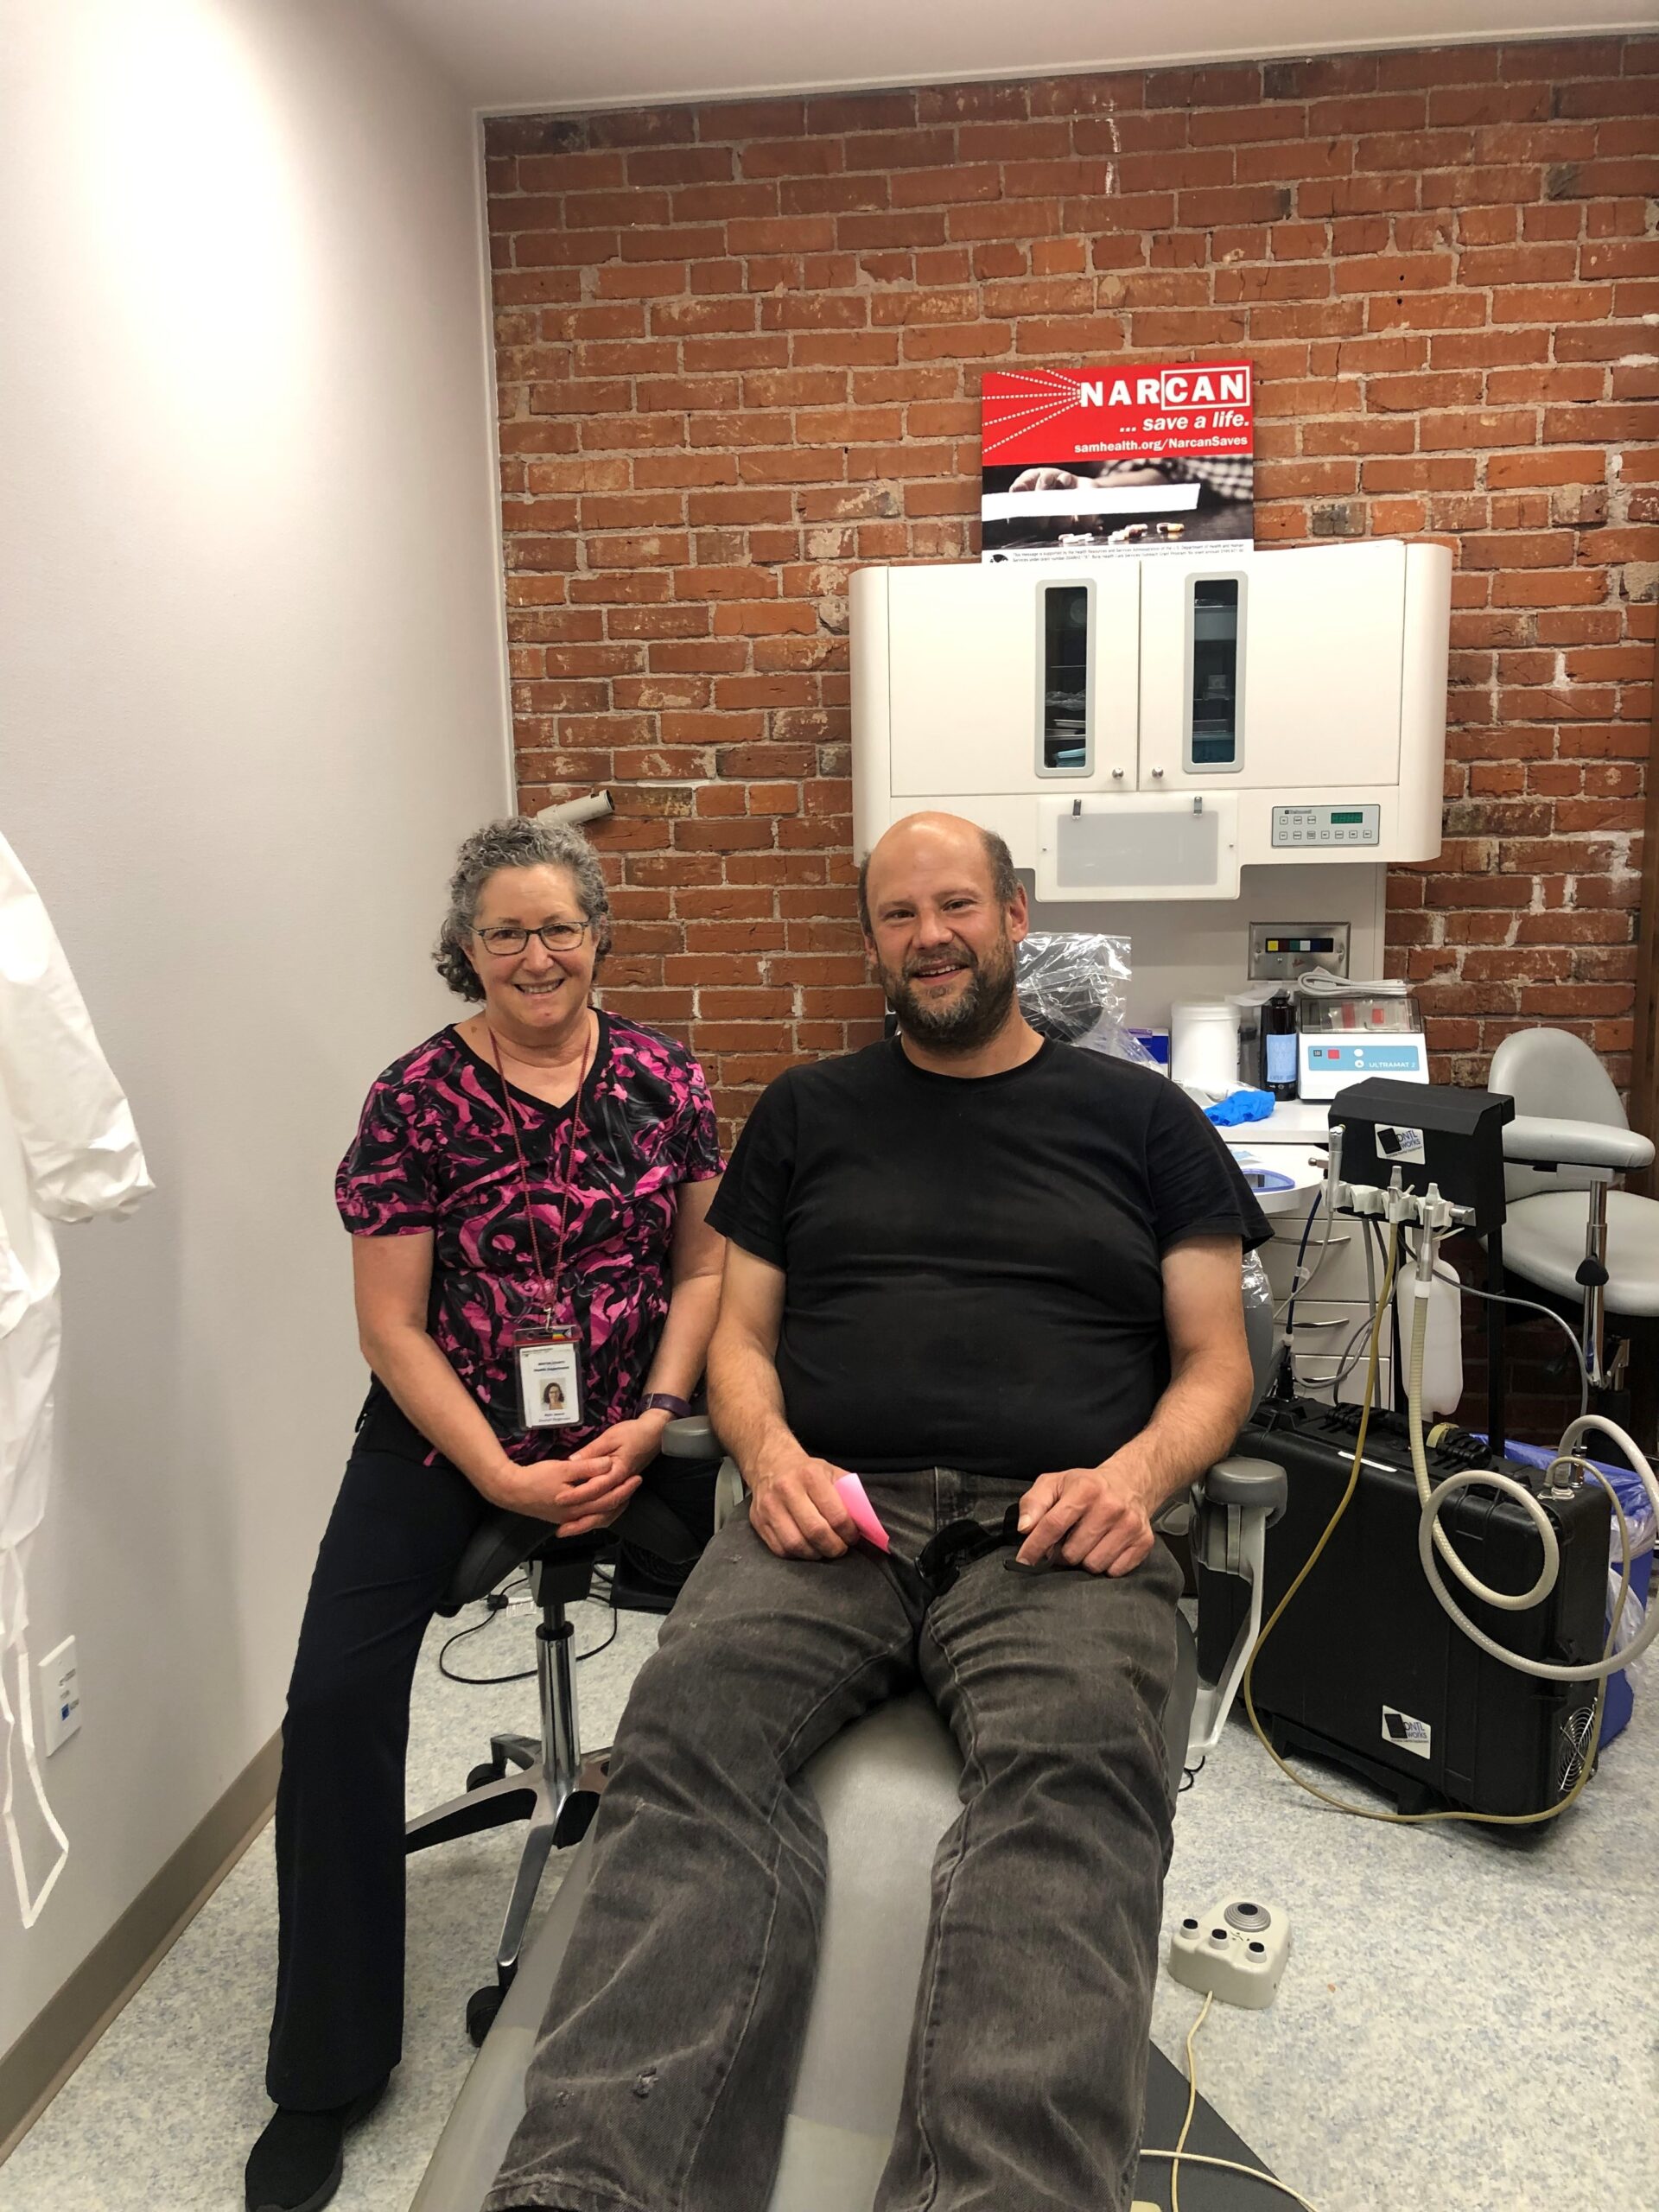 A patient pauses for a photo with a dental care professional at the C.H.A.N.C.E clinic in Albany, Oregon.